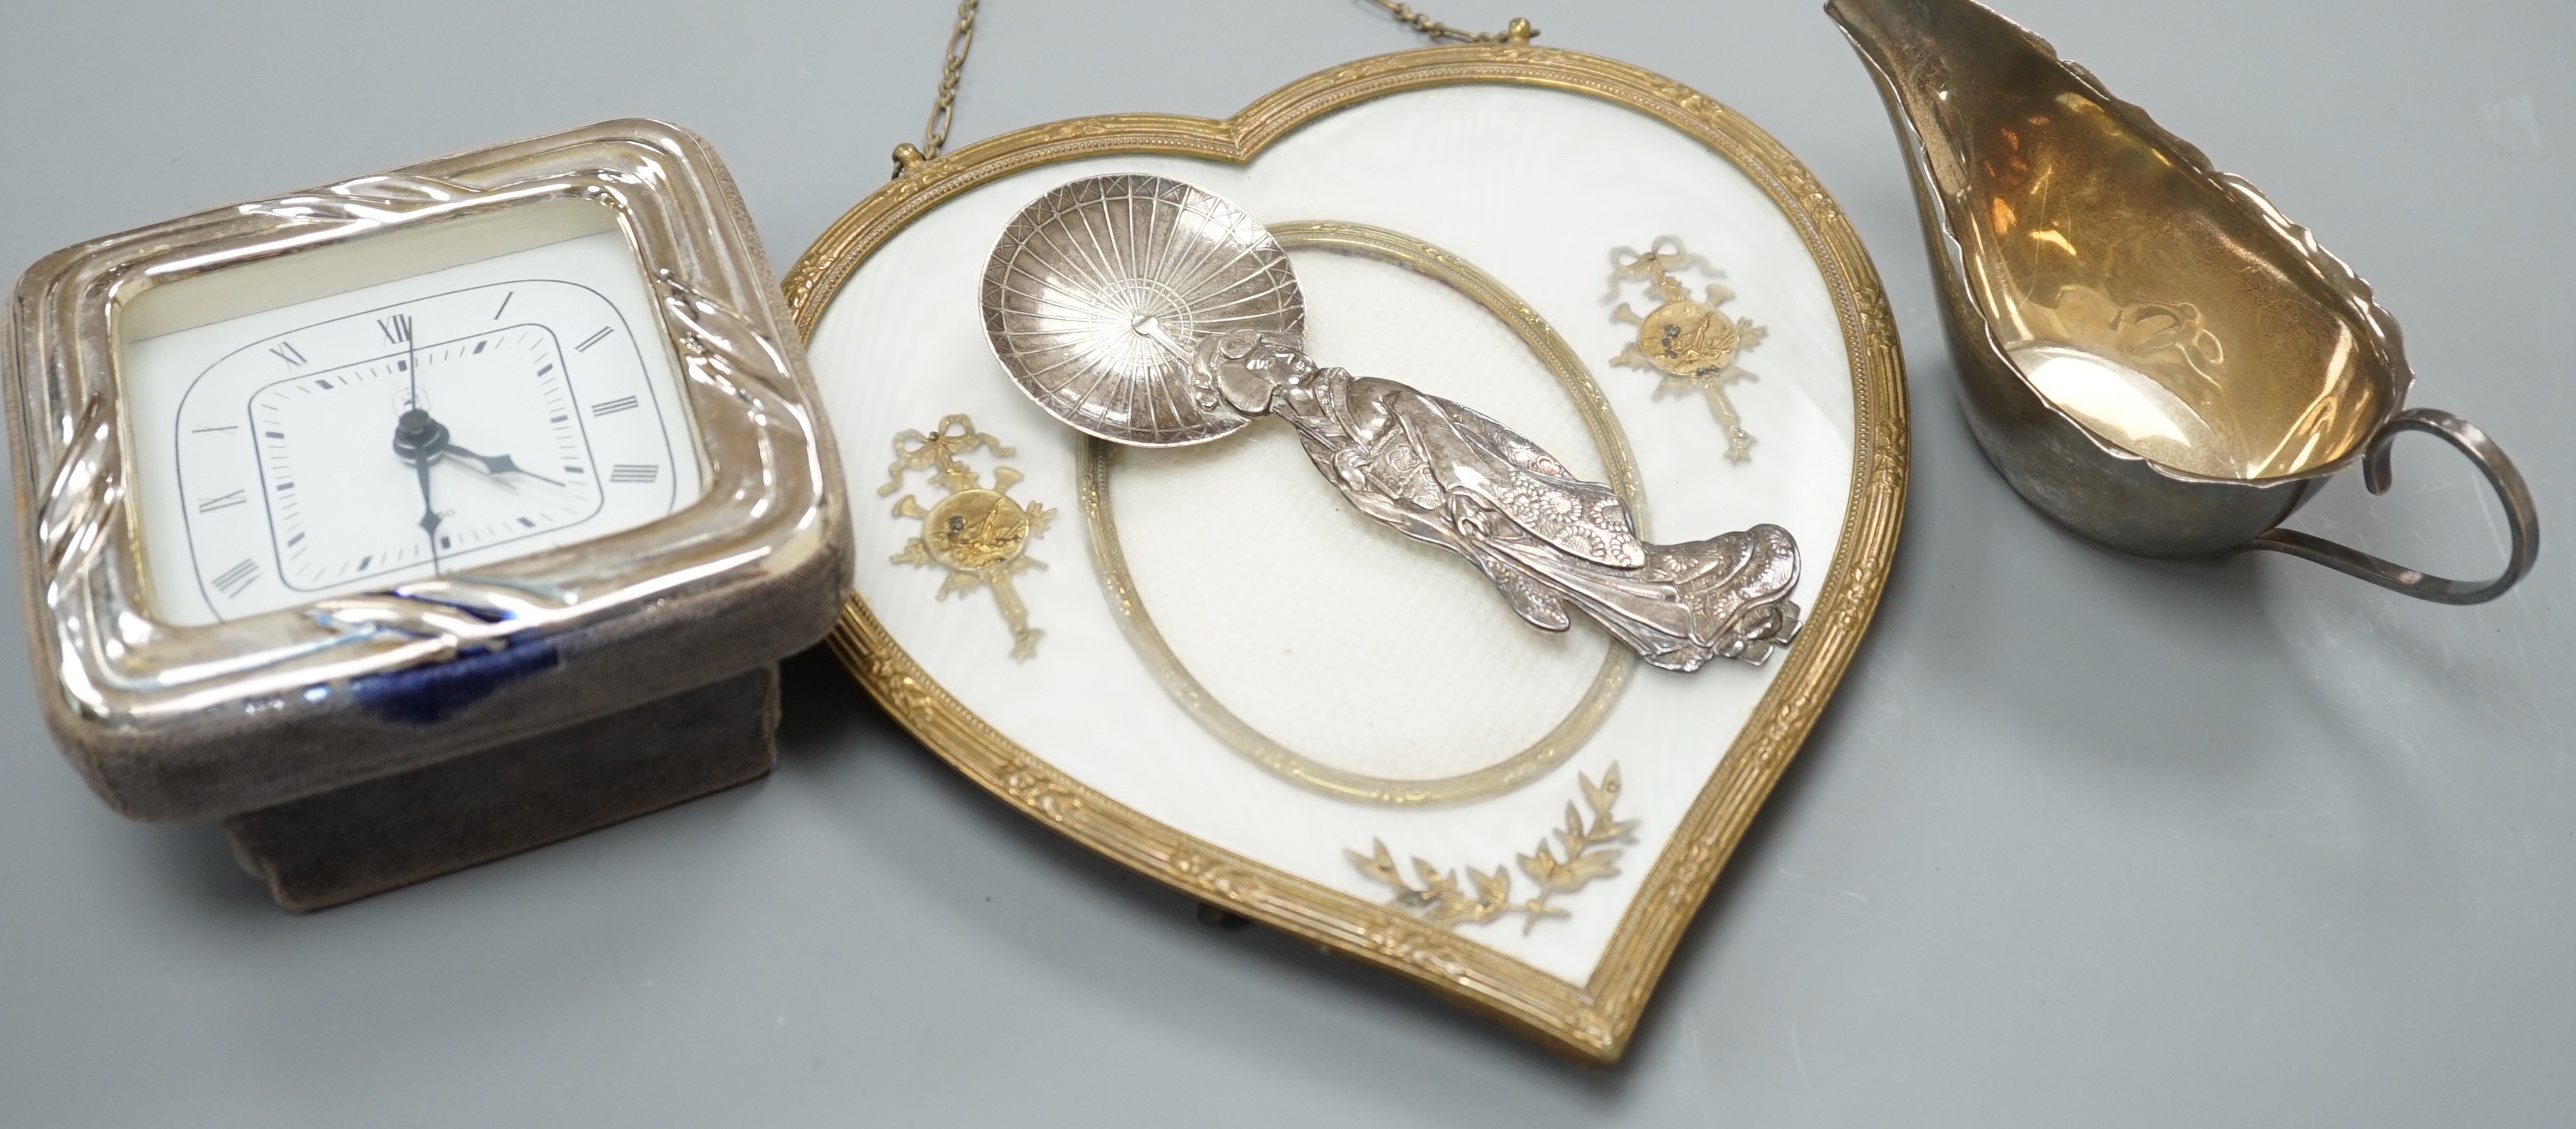 A 19th century gilt heart-shaped frame, A Japanese sterling figural spoon, a 1930's silver cream jug and modern silver mounted clock, photo frame 20 cms high.